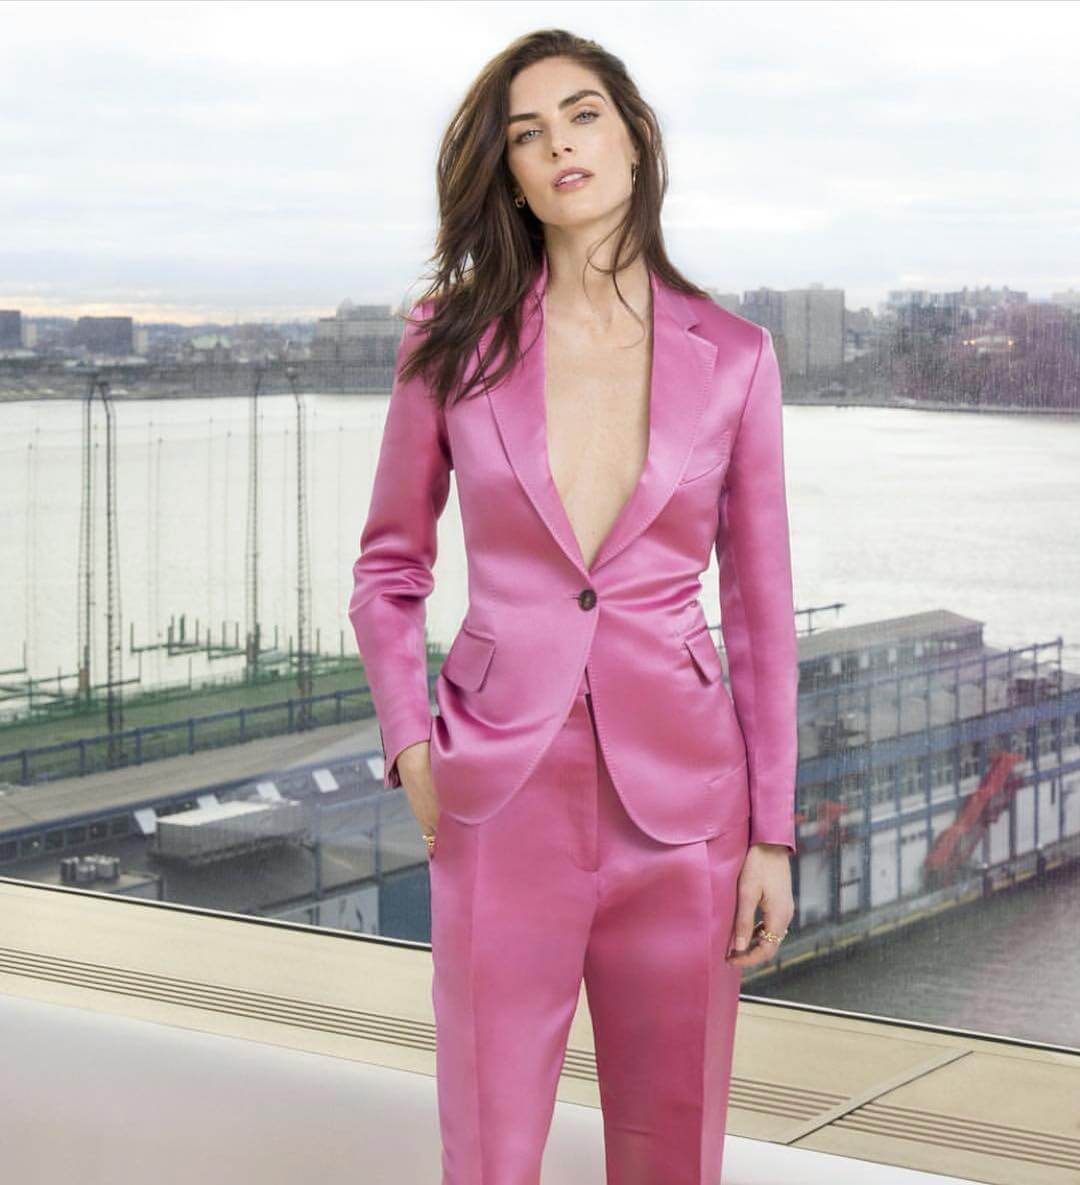 51 Hottest Hilary Rhoda Big Butt Pictures That Make Certain To Make You Her Greatest Admirer | Best Of Comic Books